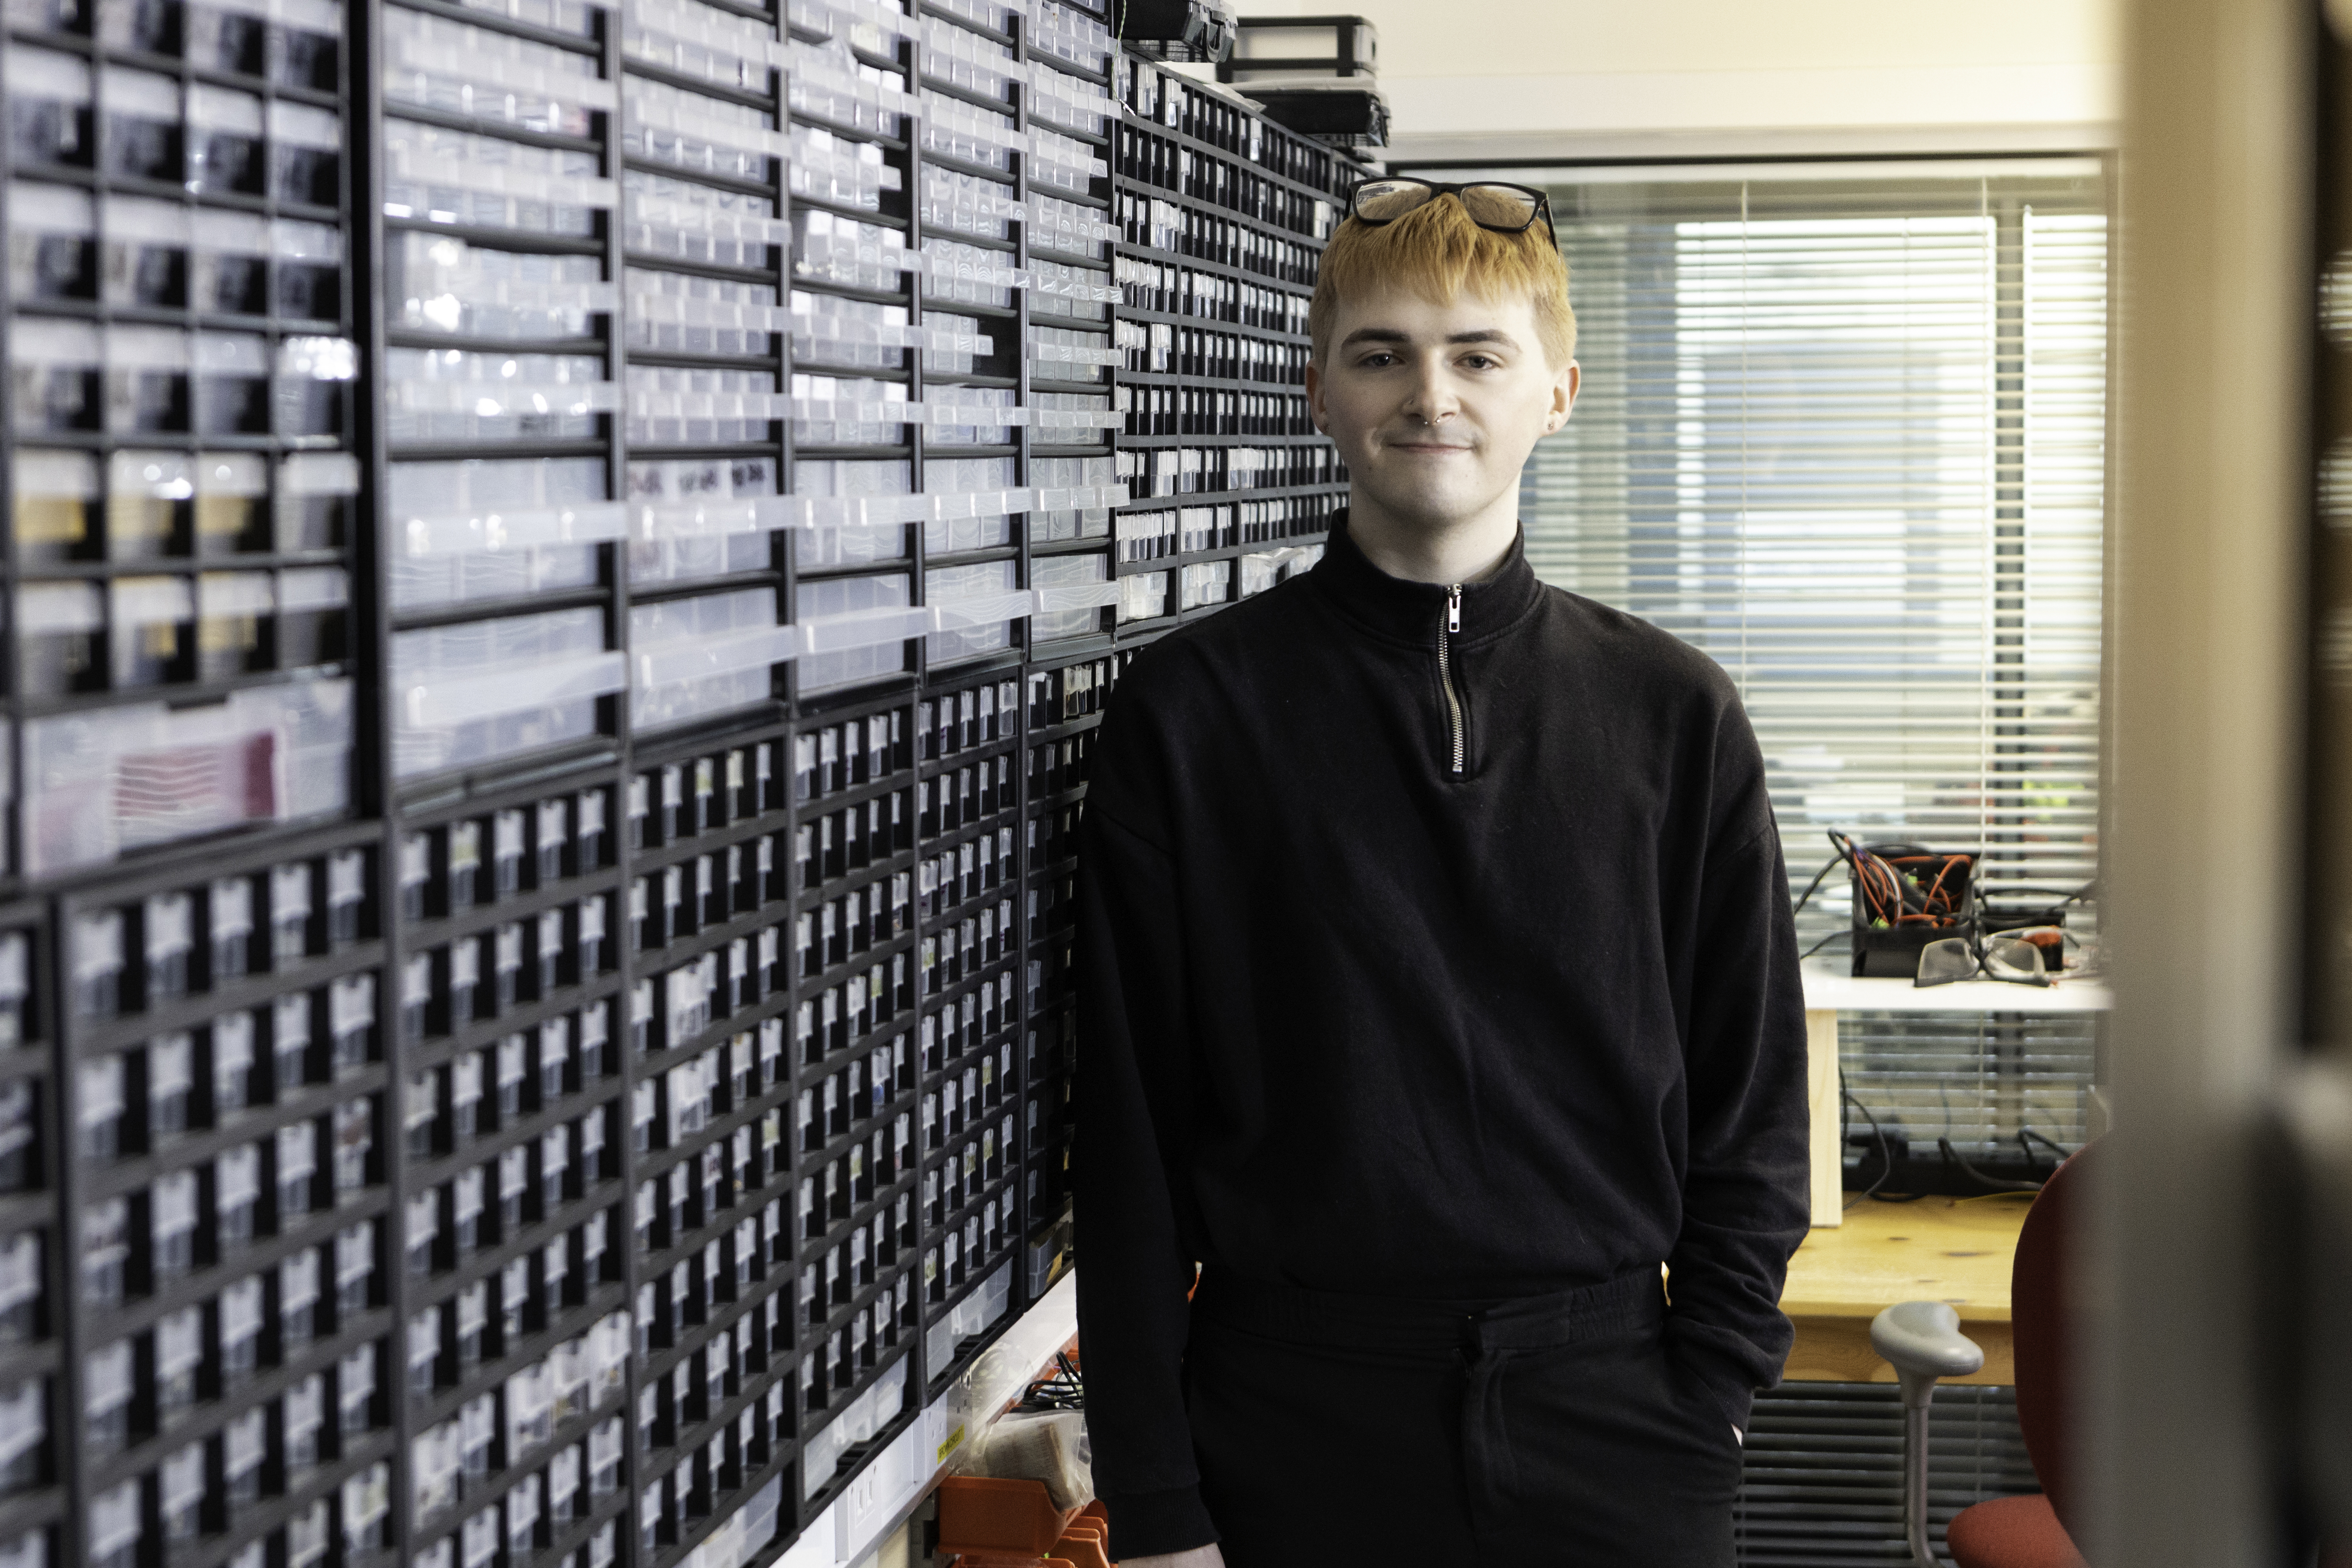 Alan in a black work fleece stands next to rows of small storage for parts